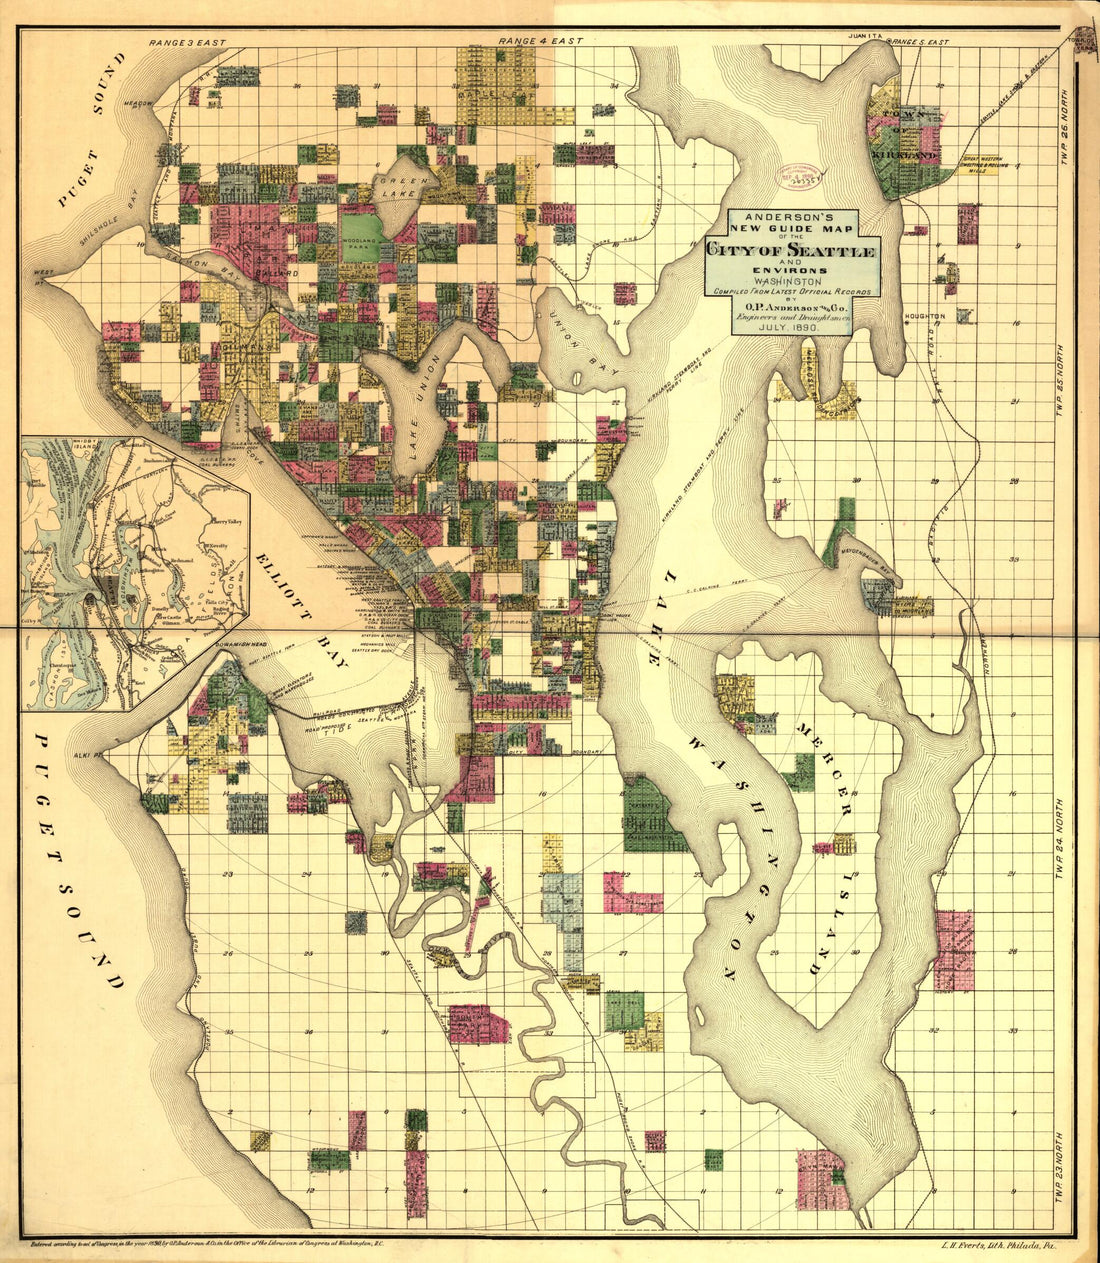 This old map of Anderson&